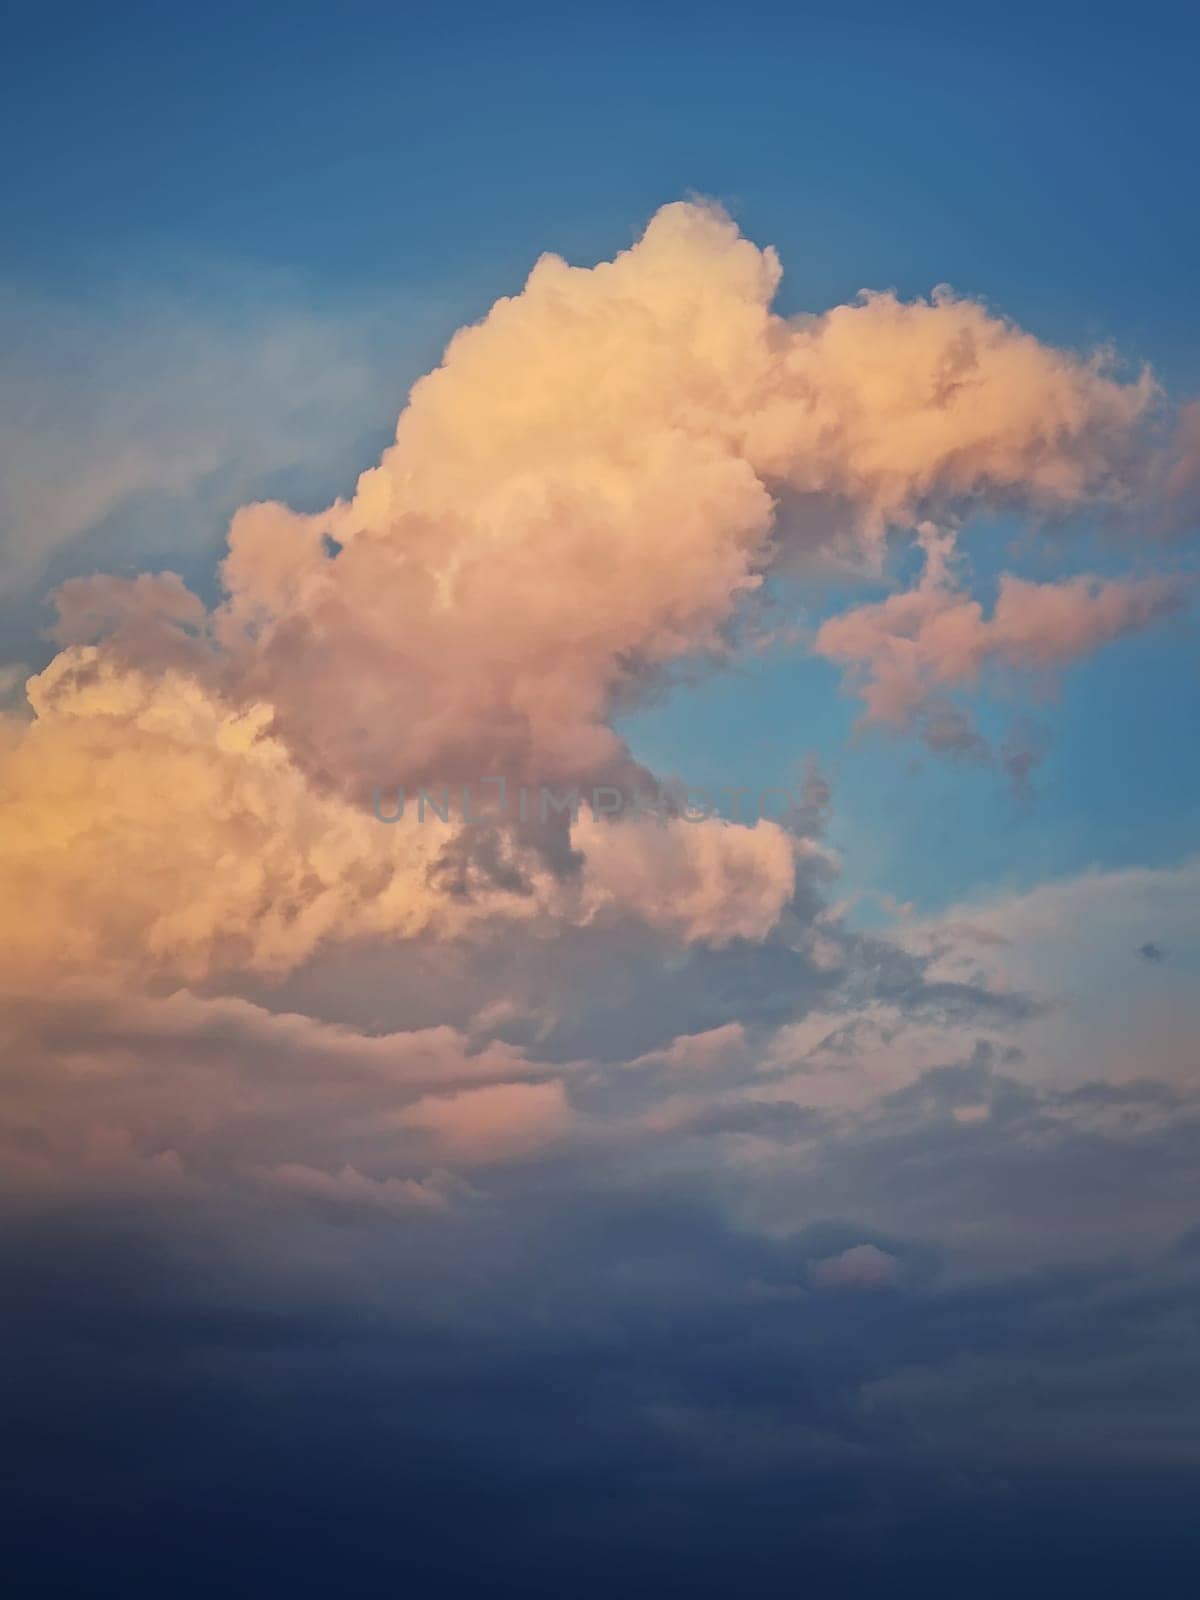 Sunlit cumulus storm clouds, pink and golden sunset light. Dreamy sky, vertical celestial background by psychoshadow